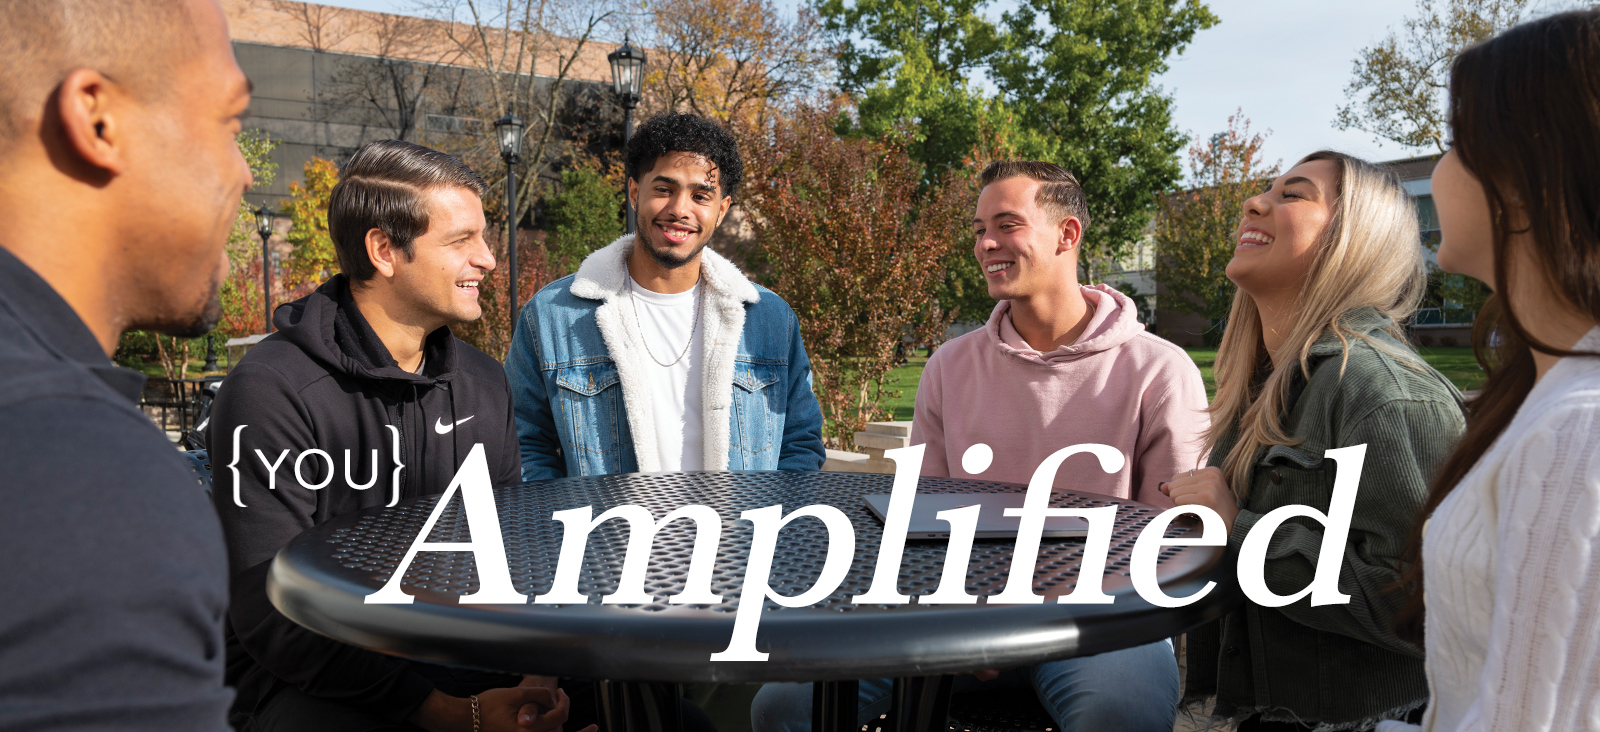 You, Amplified. Students smiling and talking at a table outside of a campus building